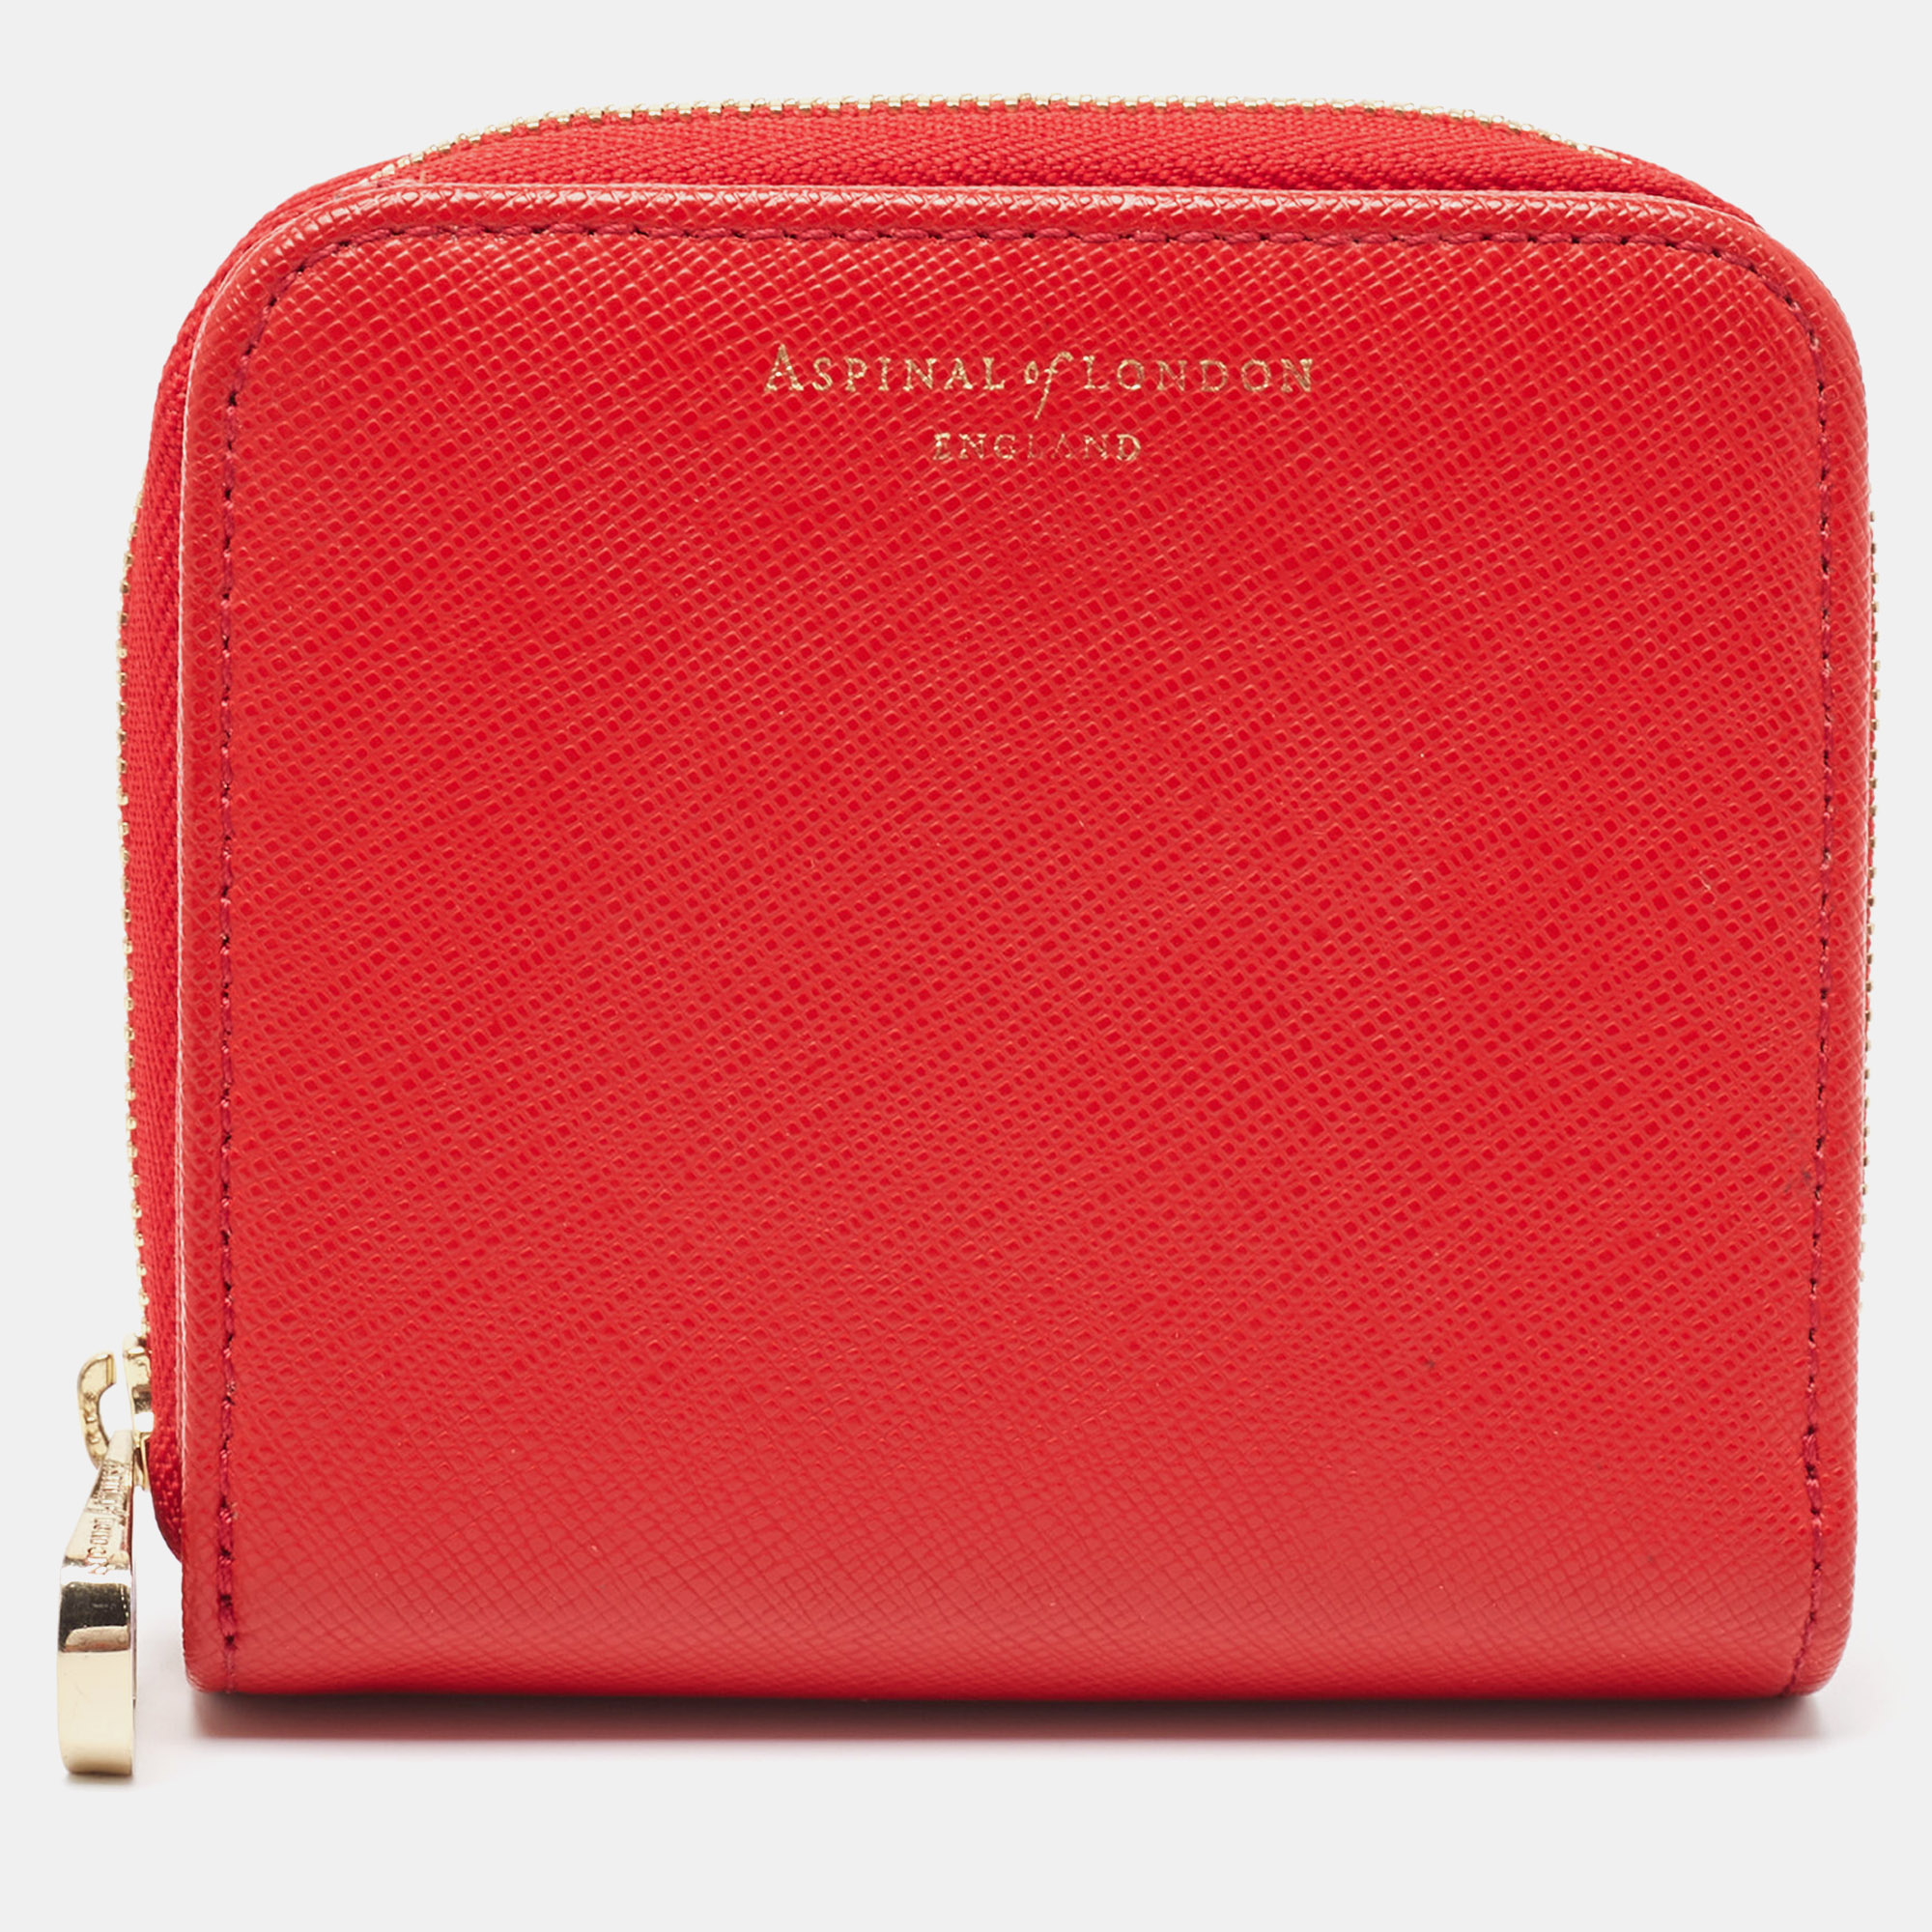 Aspinal of london red leather zip around compact wallet